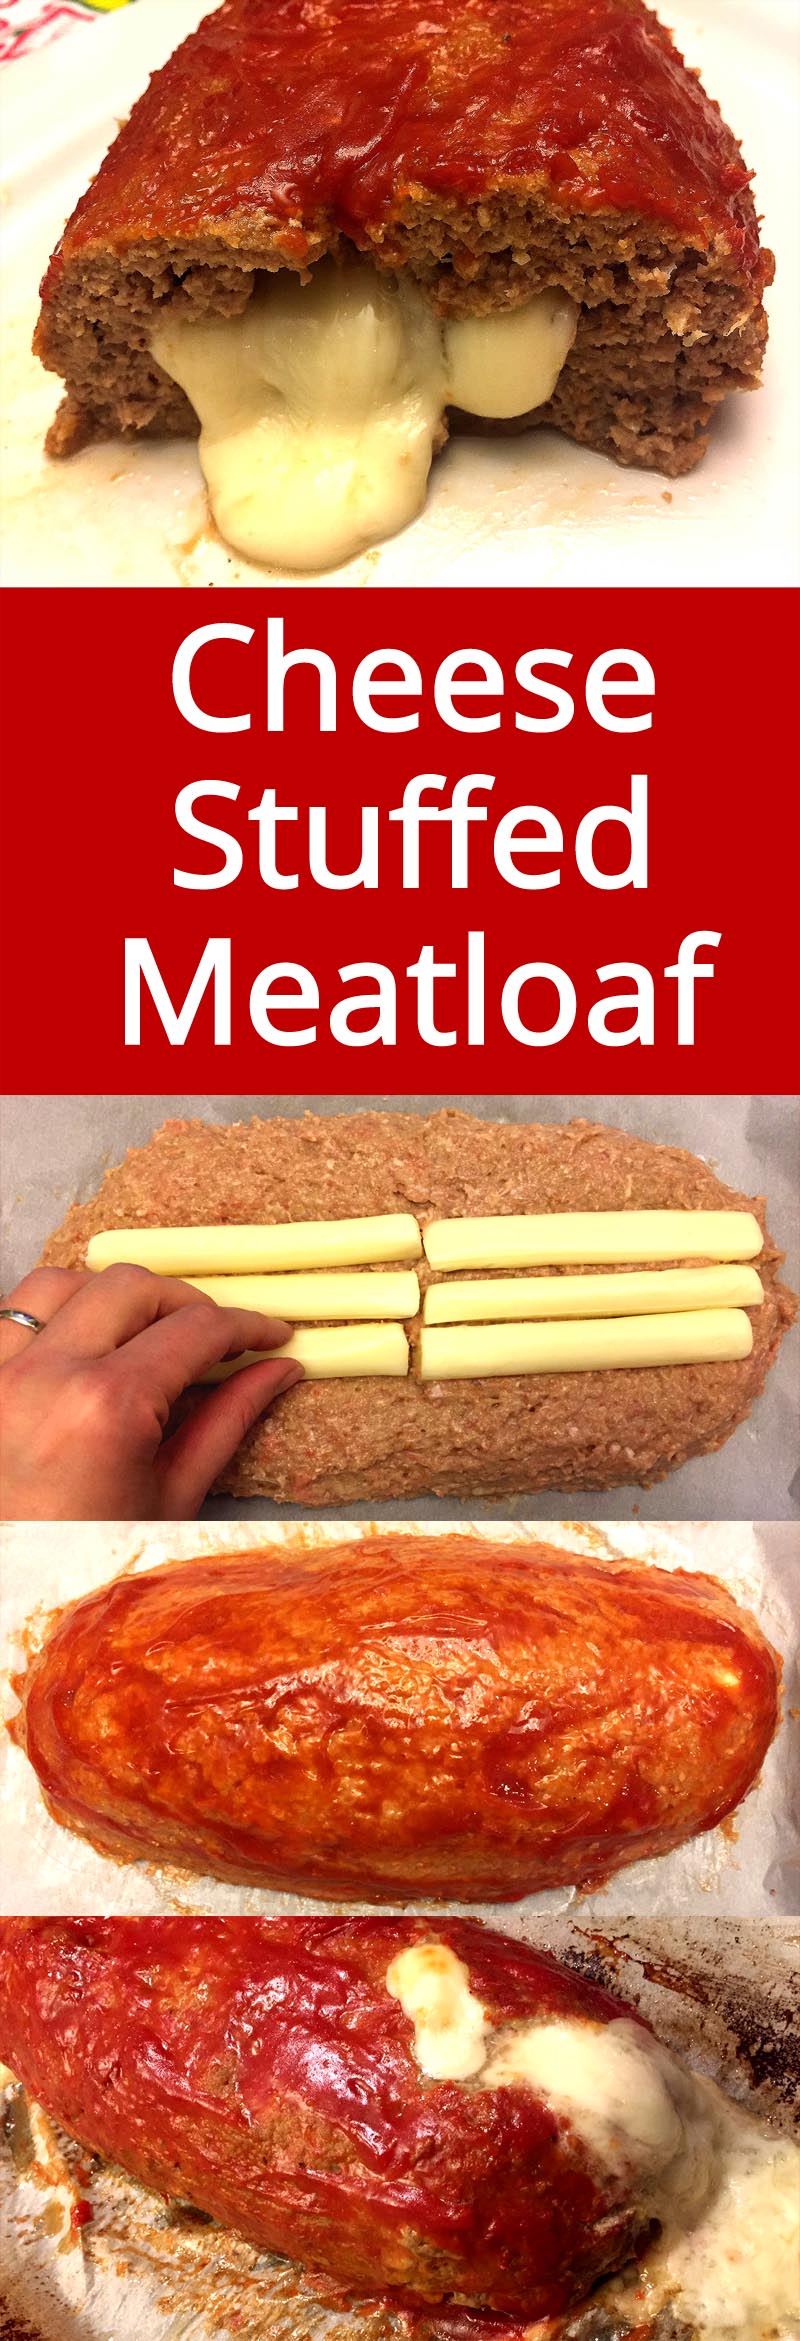 This meatloaf has a surprise inside! Love this recipe! | MelanieCooks.com